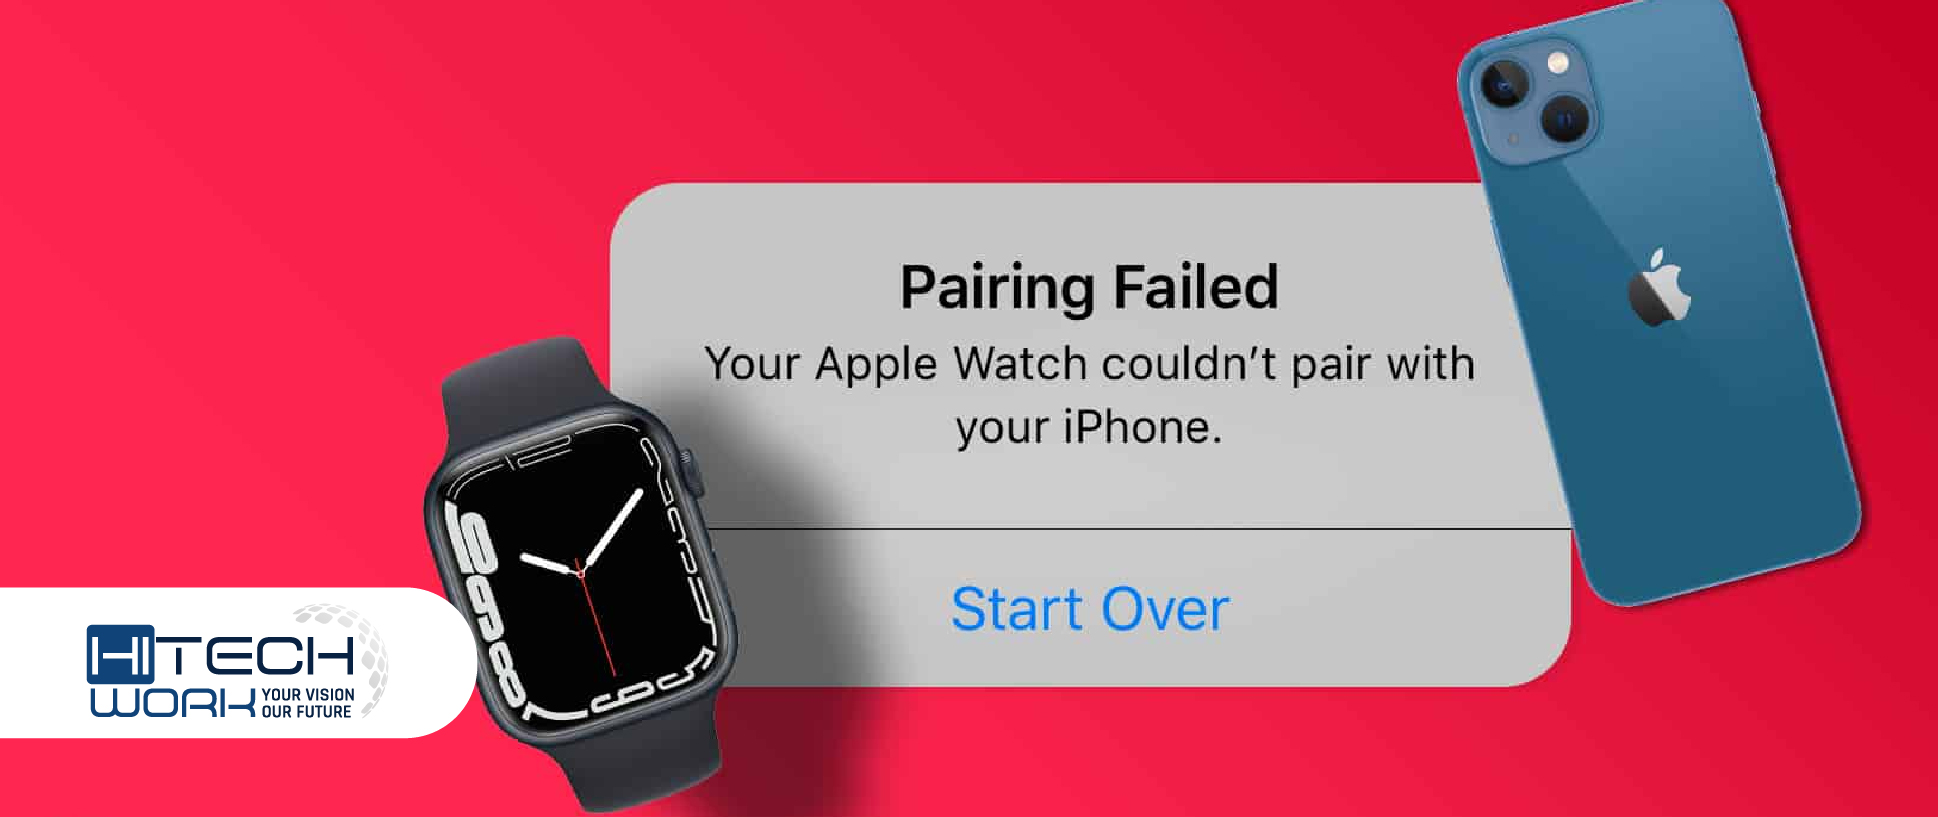 Apple Watch Won't Pair to iPhone